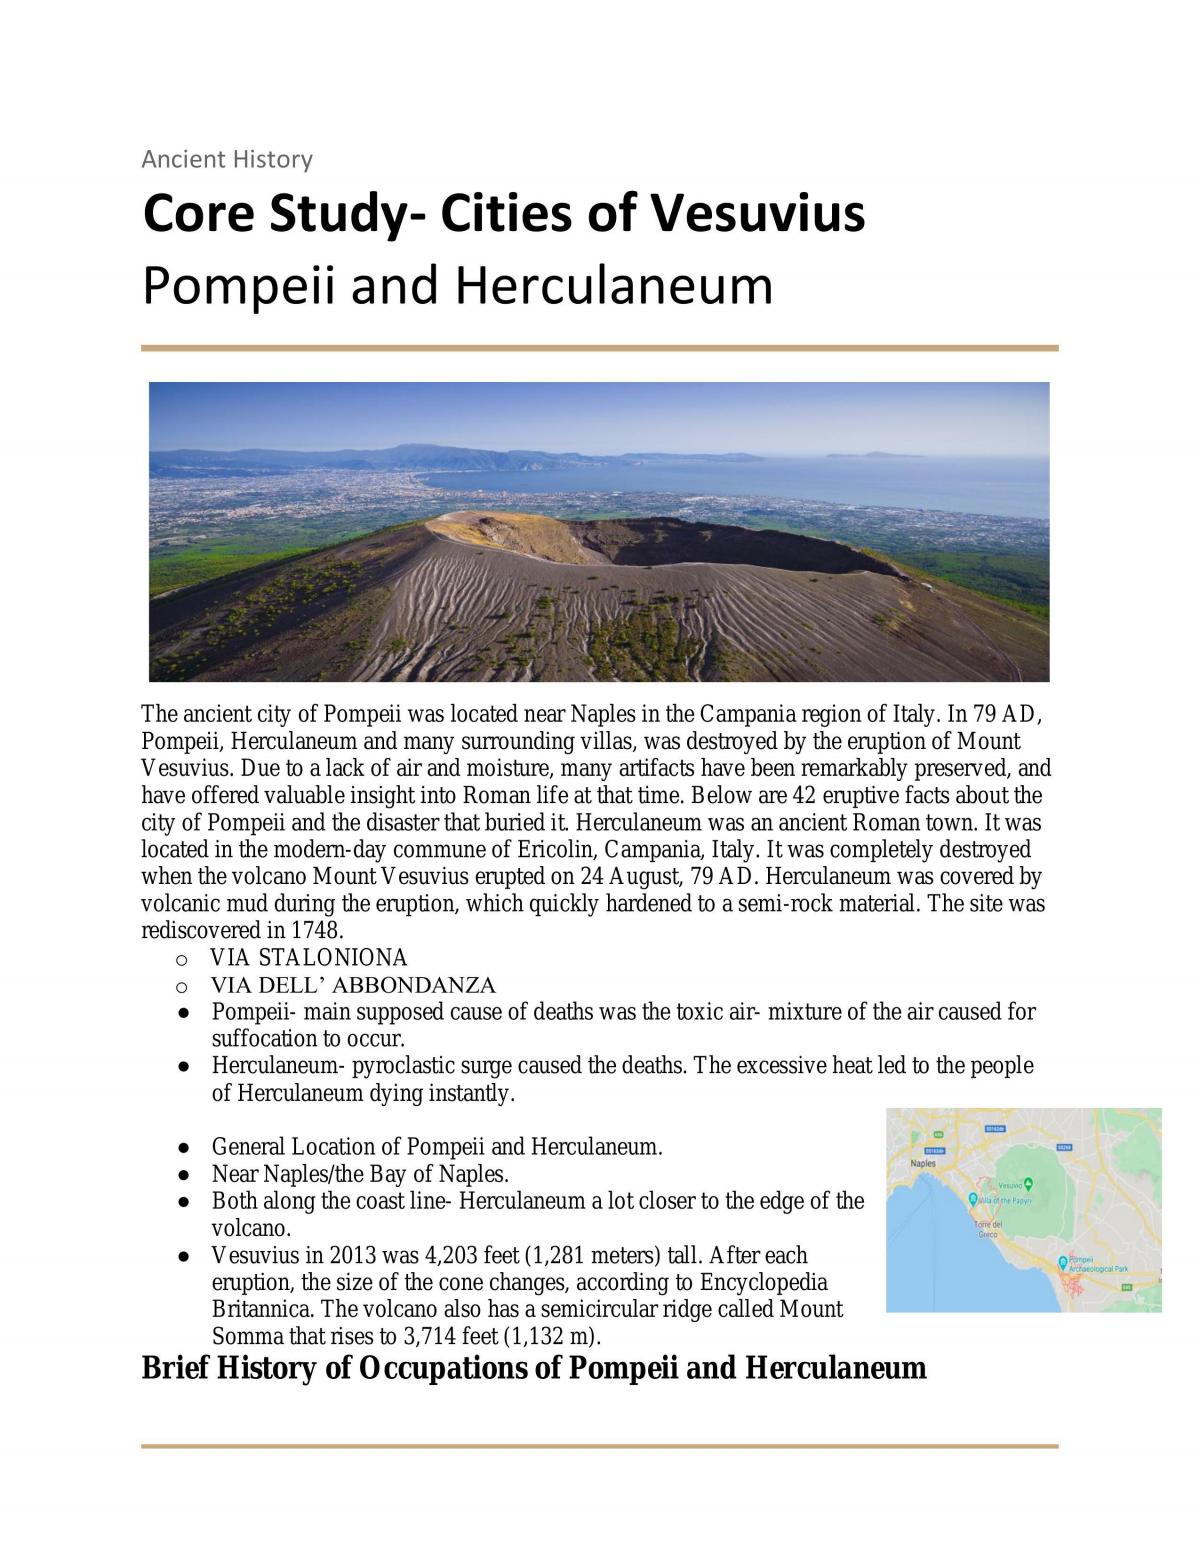 Cities of Vesuvius - Study Notes - Page 1